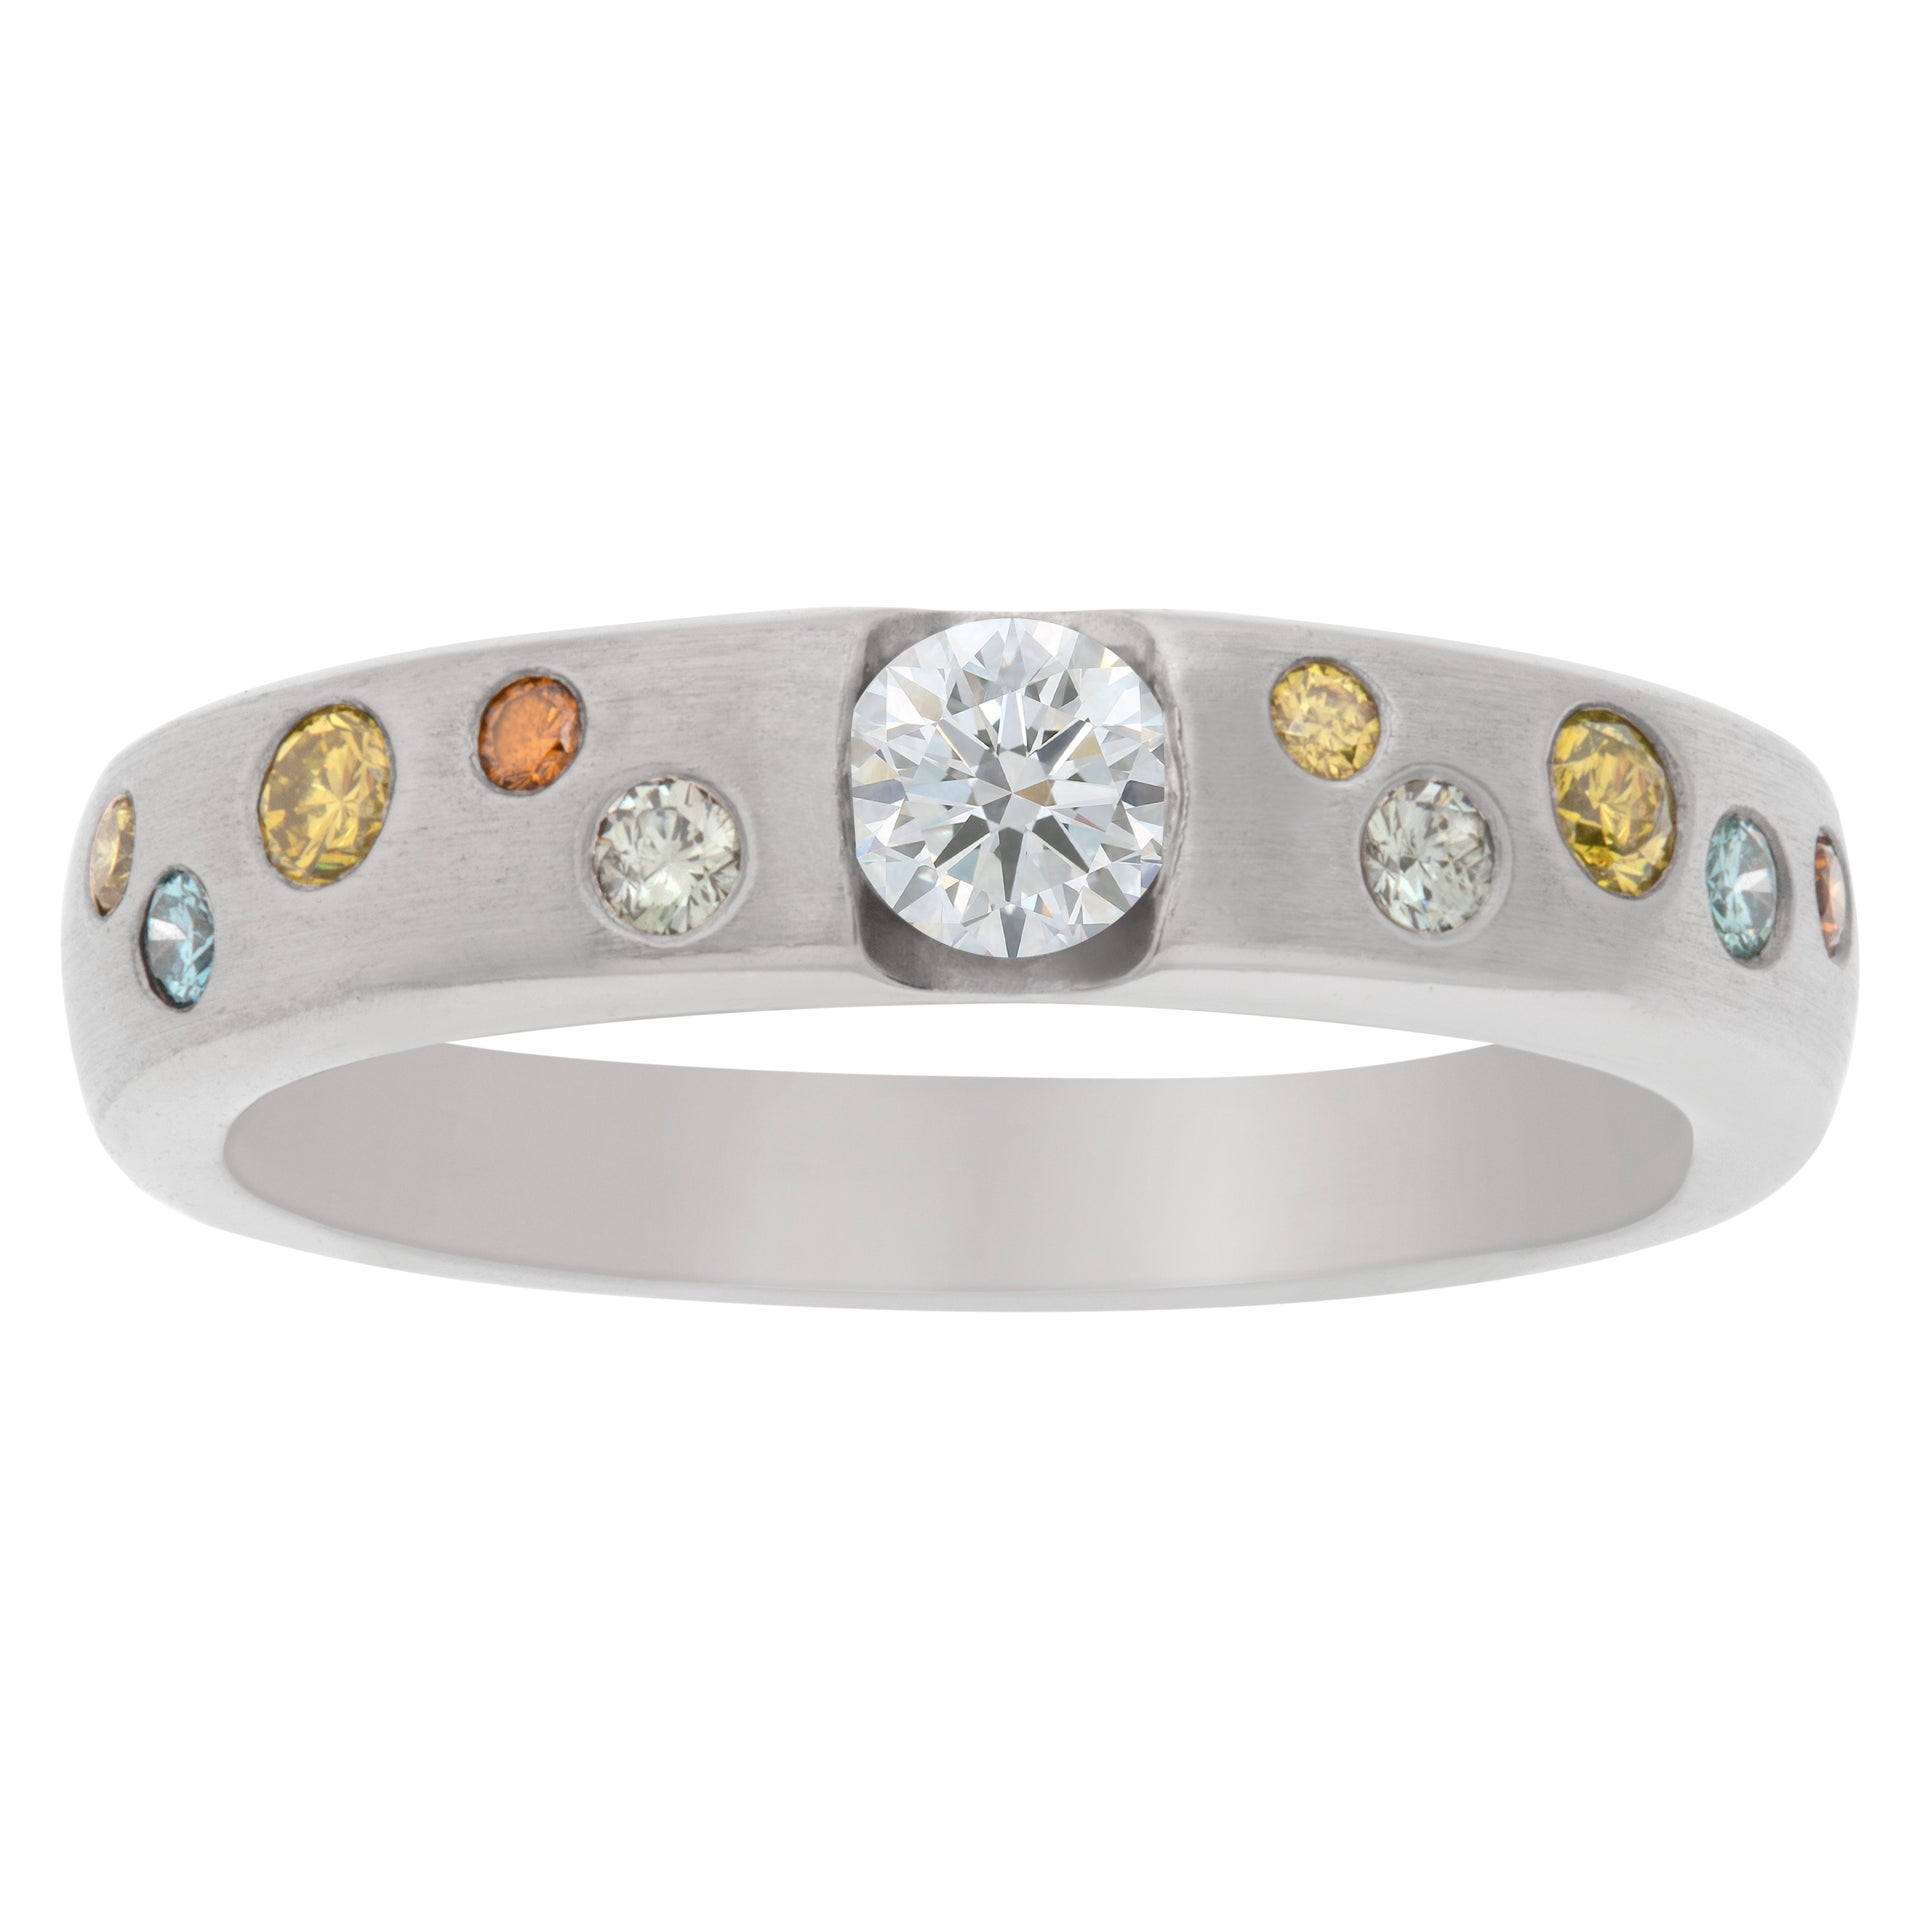 Platinum ring with center diamond and colorful accent stones For Sale